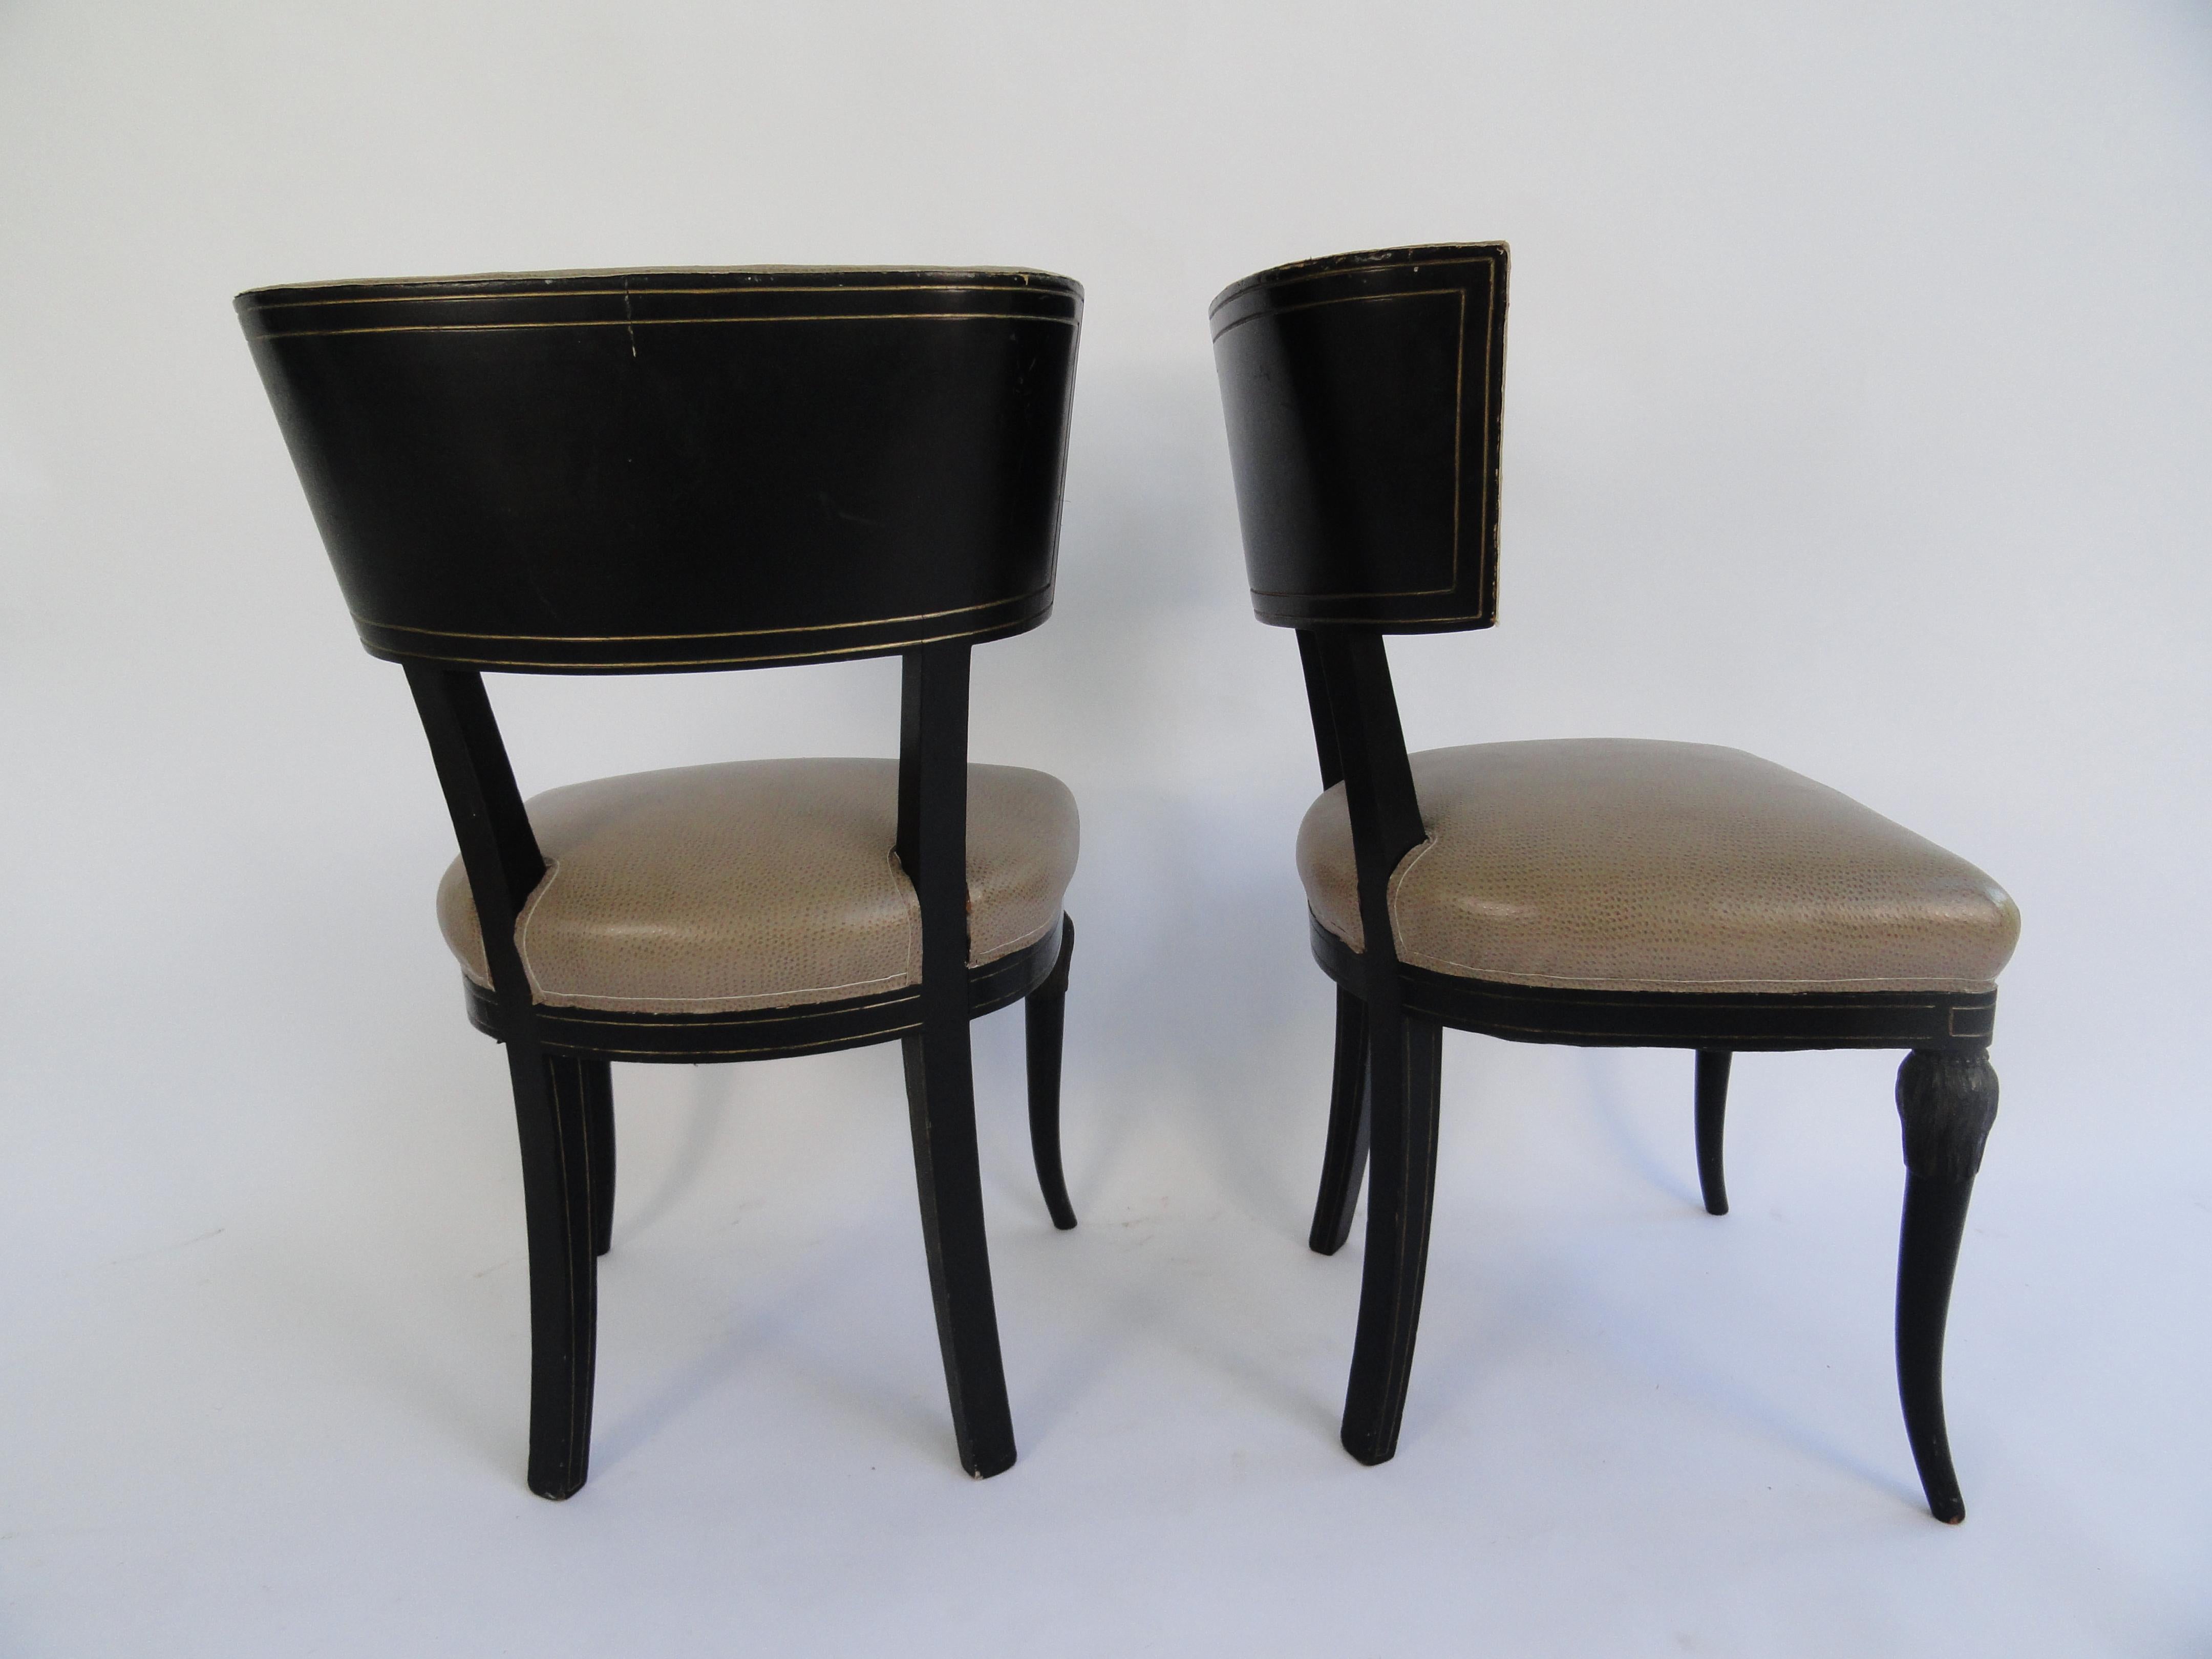 Set of four Maison Jansen side chairs with original ebony finish with gilt detail upholstered in faux.